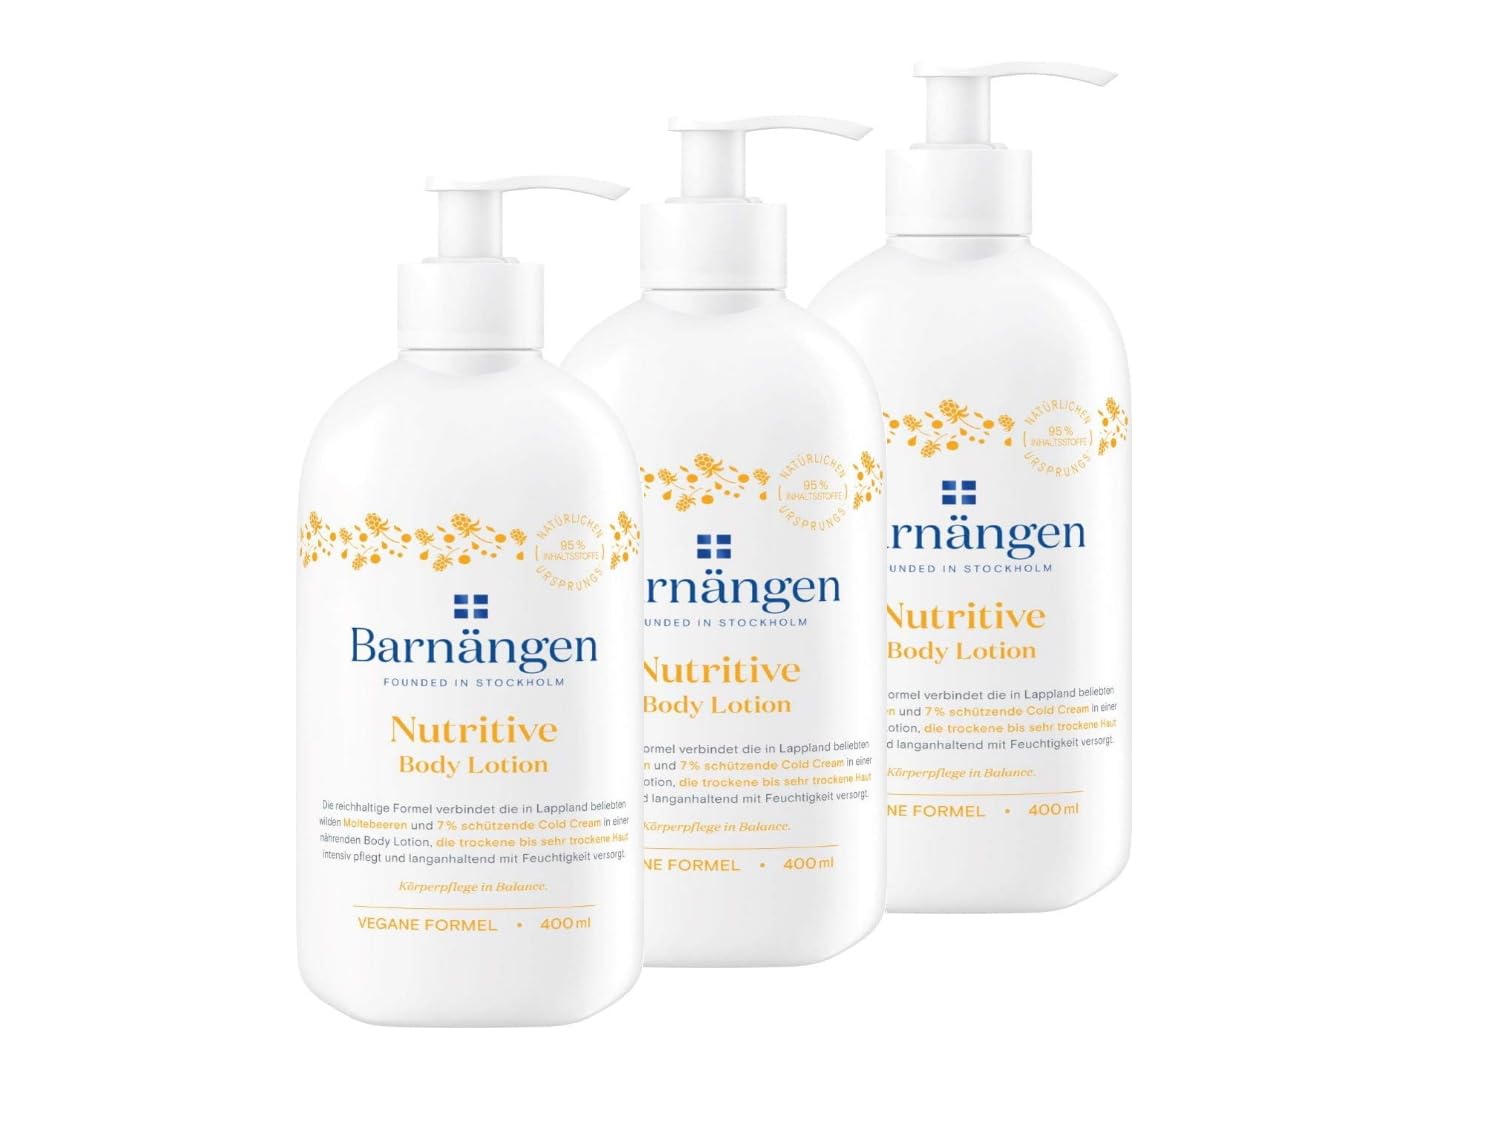 Barnängen Nutritive Body Lotion 3 x 400 ml with Cold Cream for Dry to Very Dry Skin Effectively Protects Against Autosene Formula Dermatologically Tested